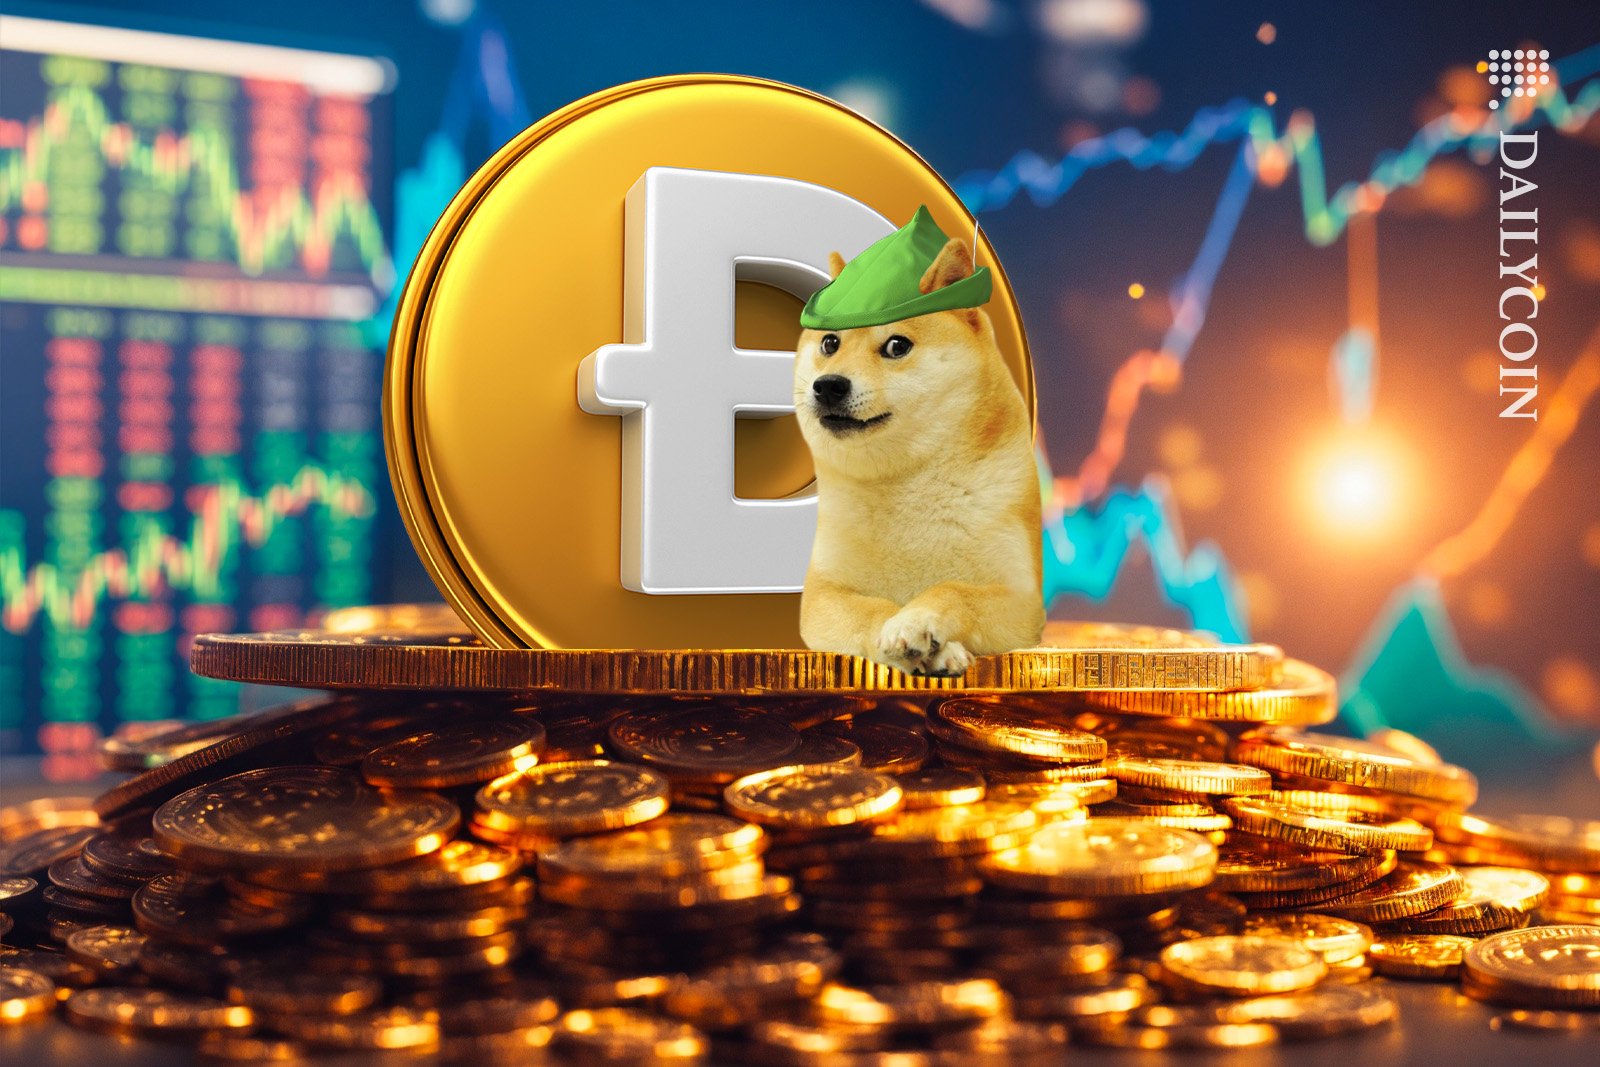 Doge sitting on a pile of coins with a robin hood hat.